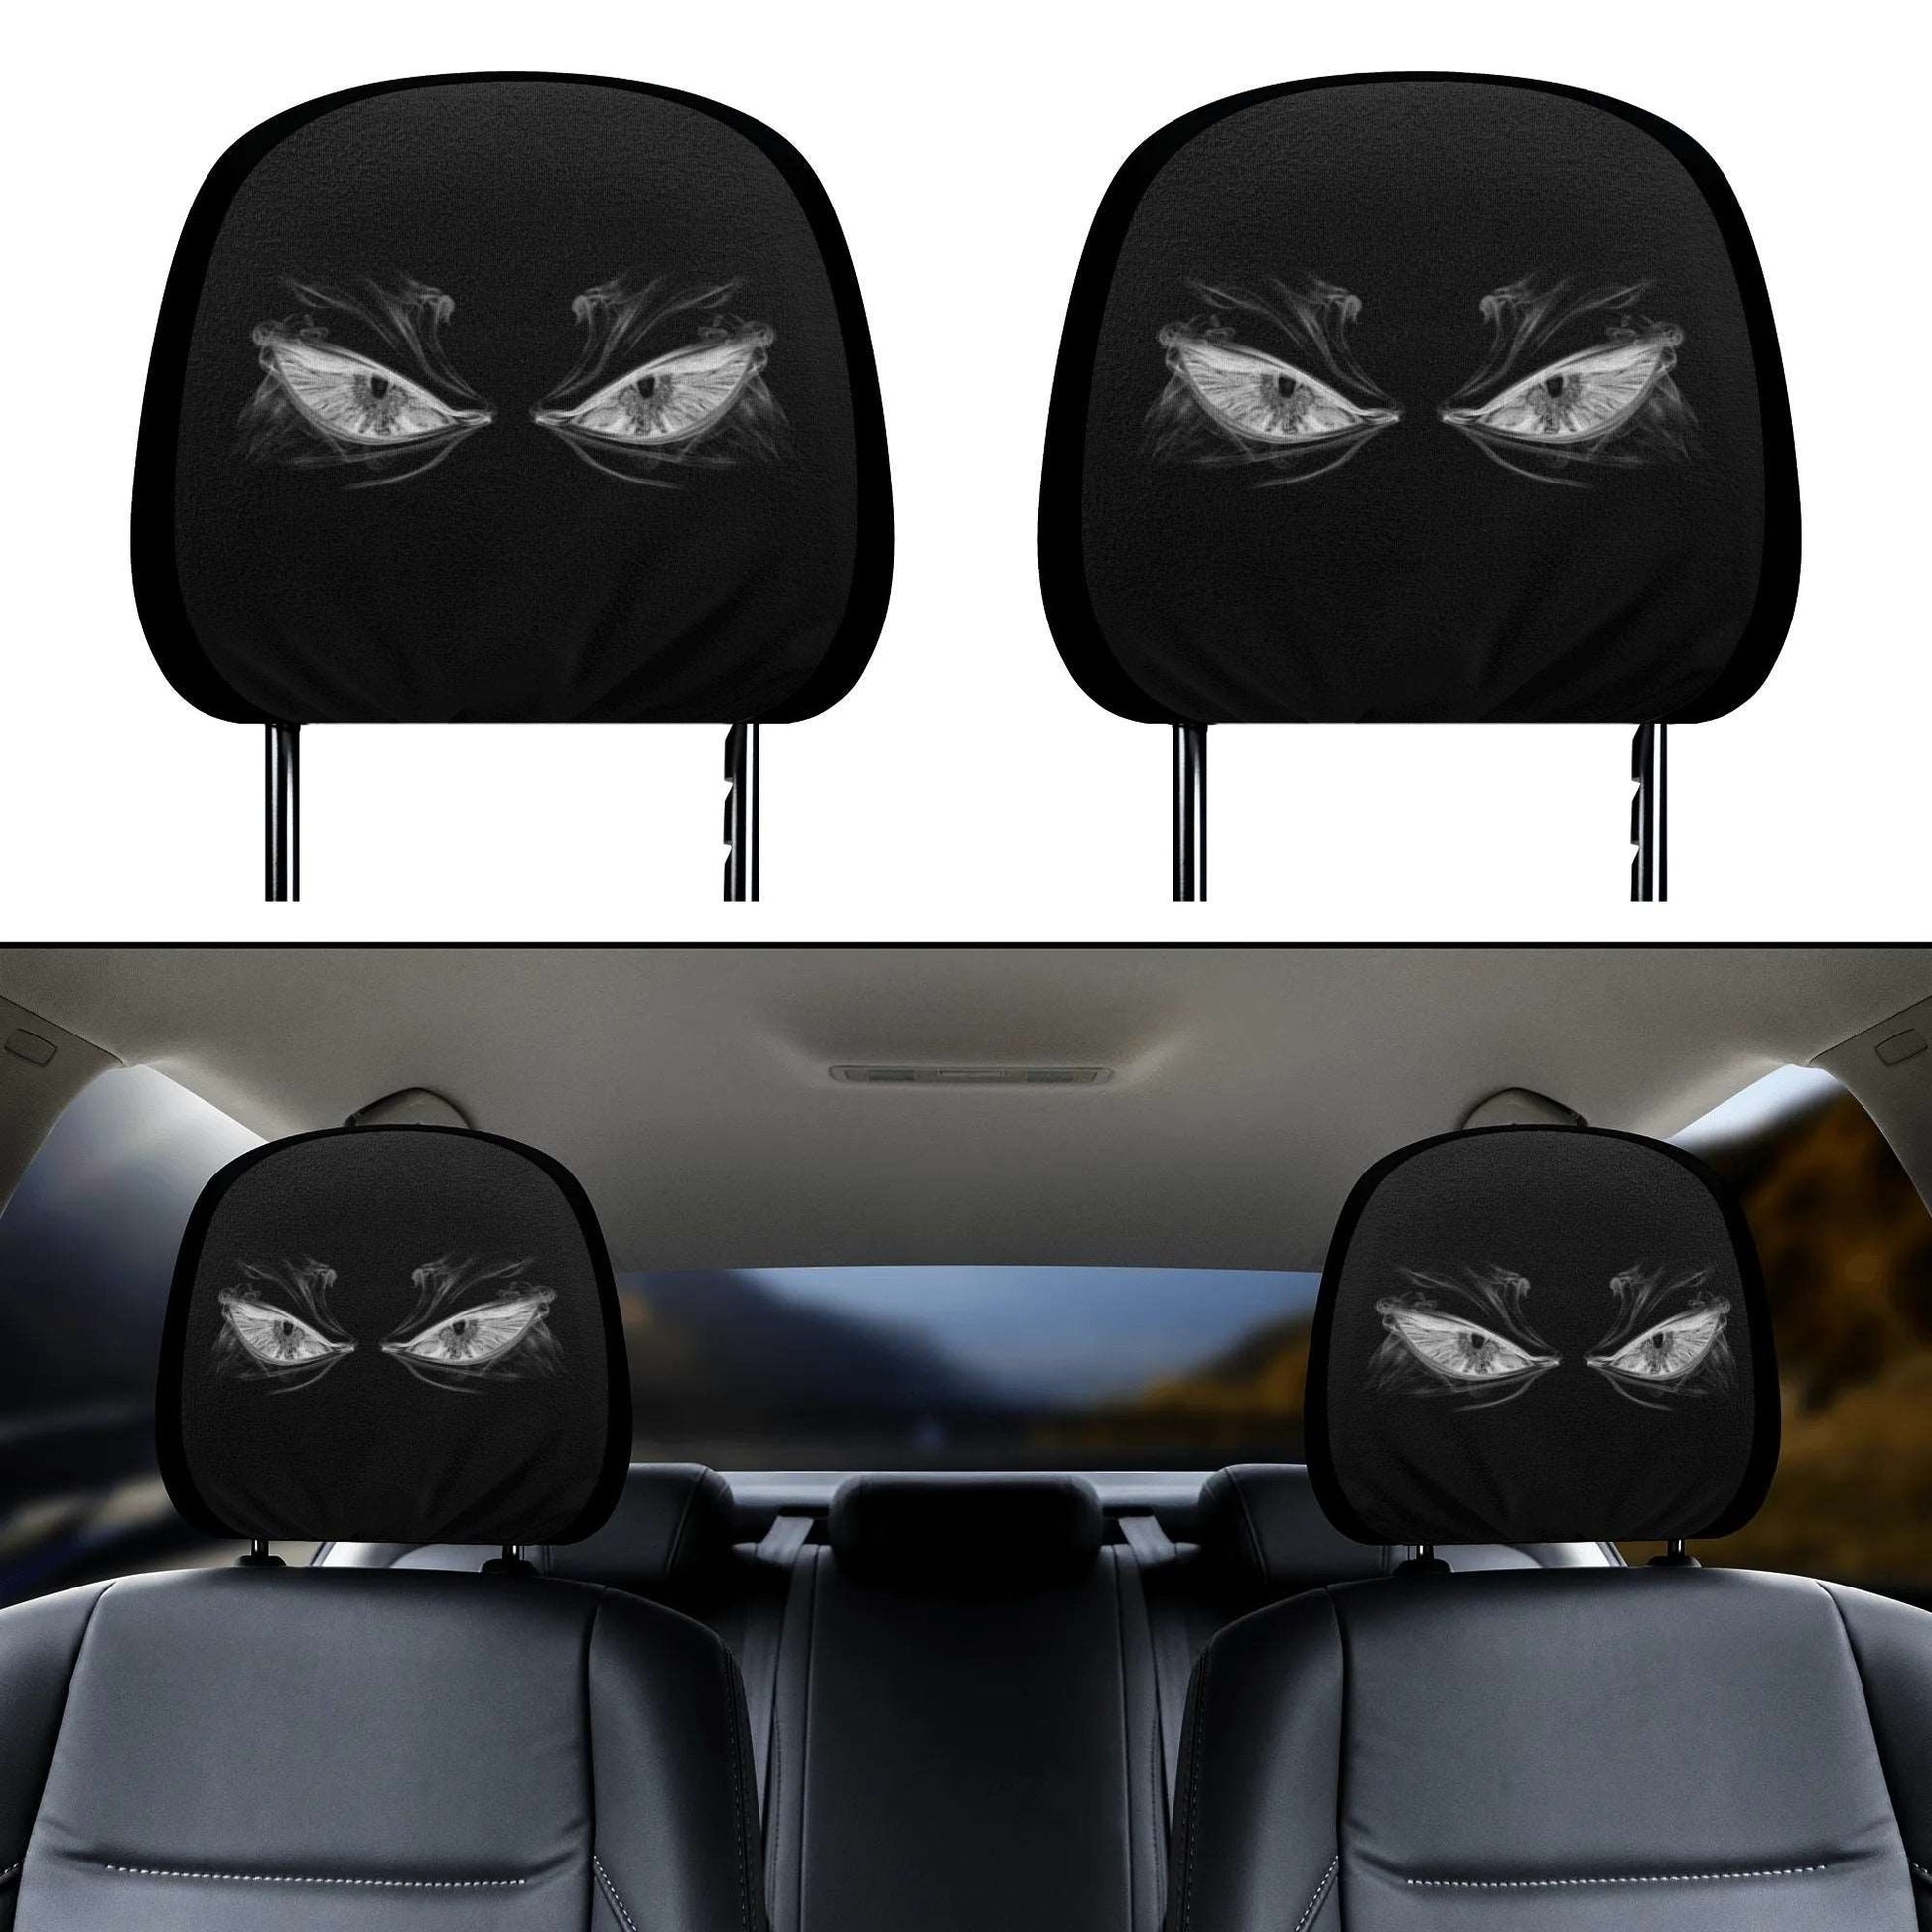 Angry Eyes Car Headrest Covers head rest covers Pioneer Kitty Market Default Title  